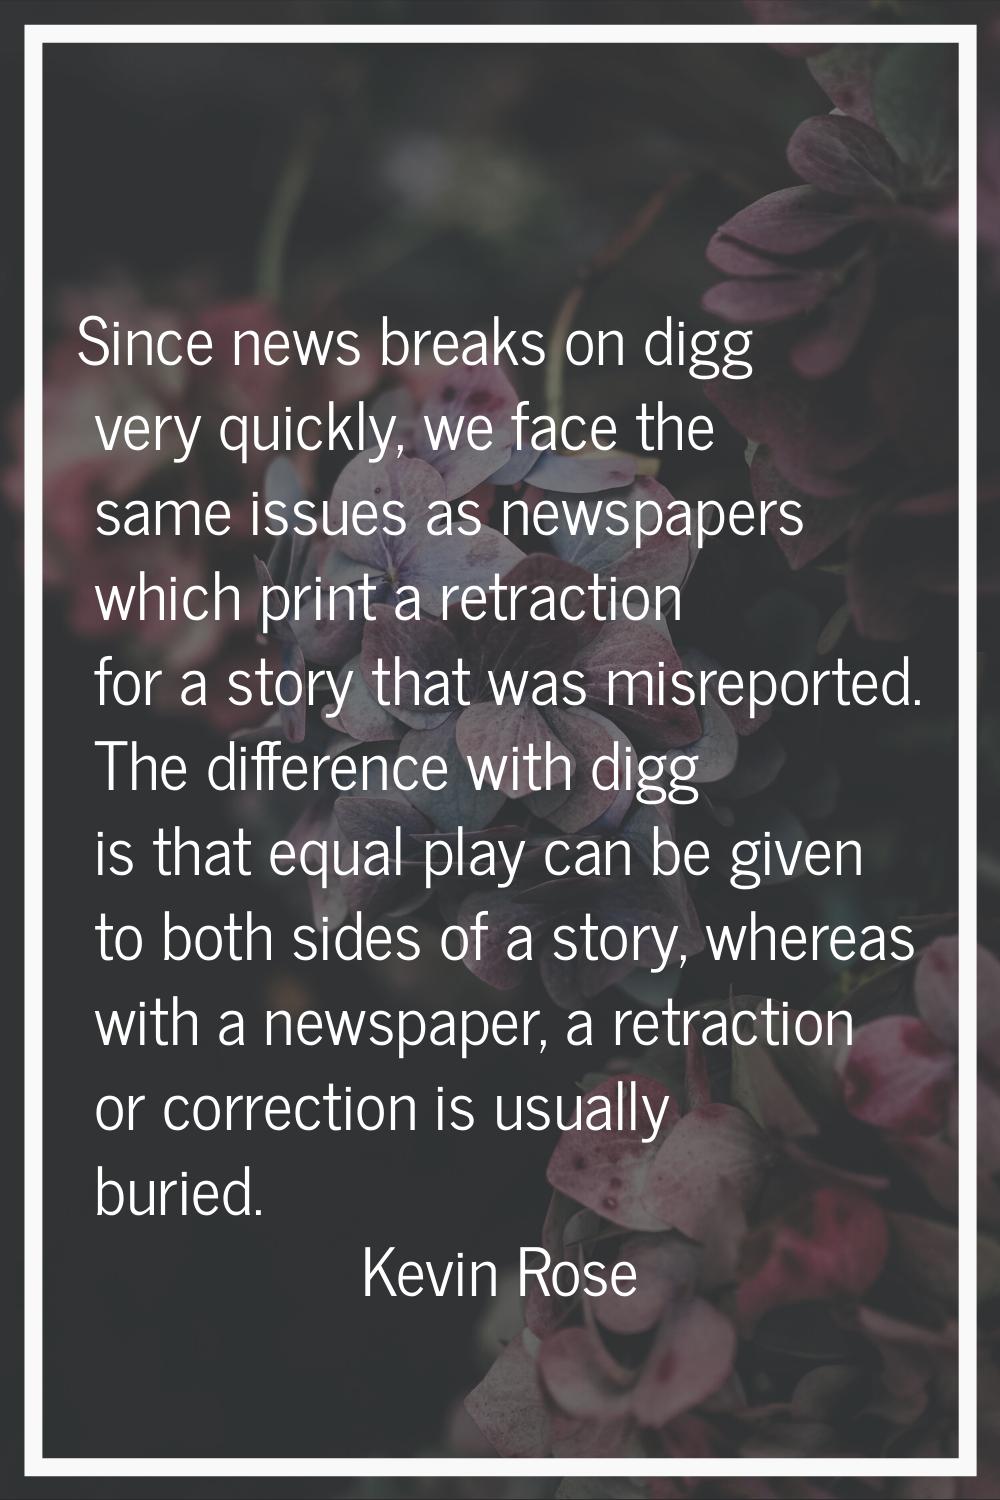 Since news breaks on digg very quickly, we face the same issues as newspapers which print a retract